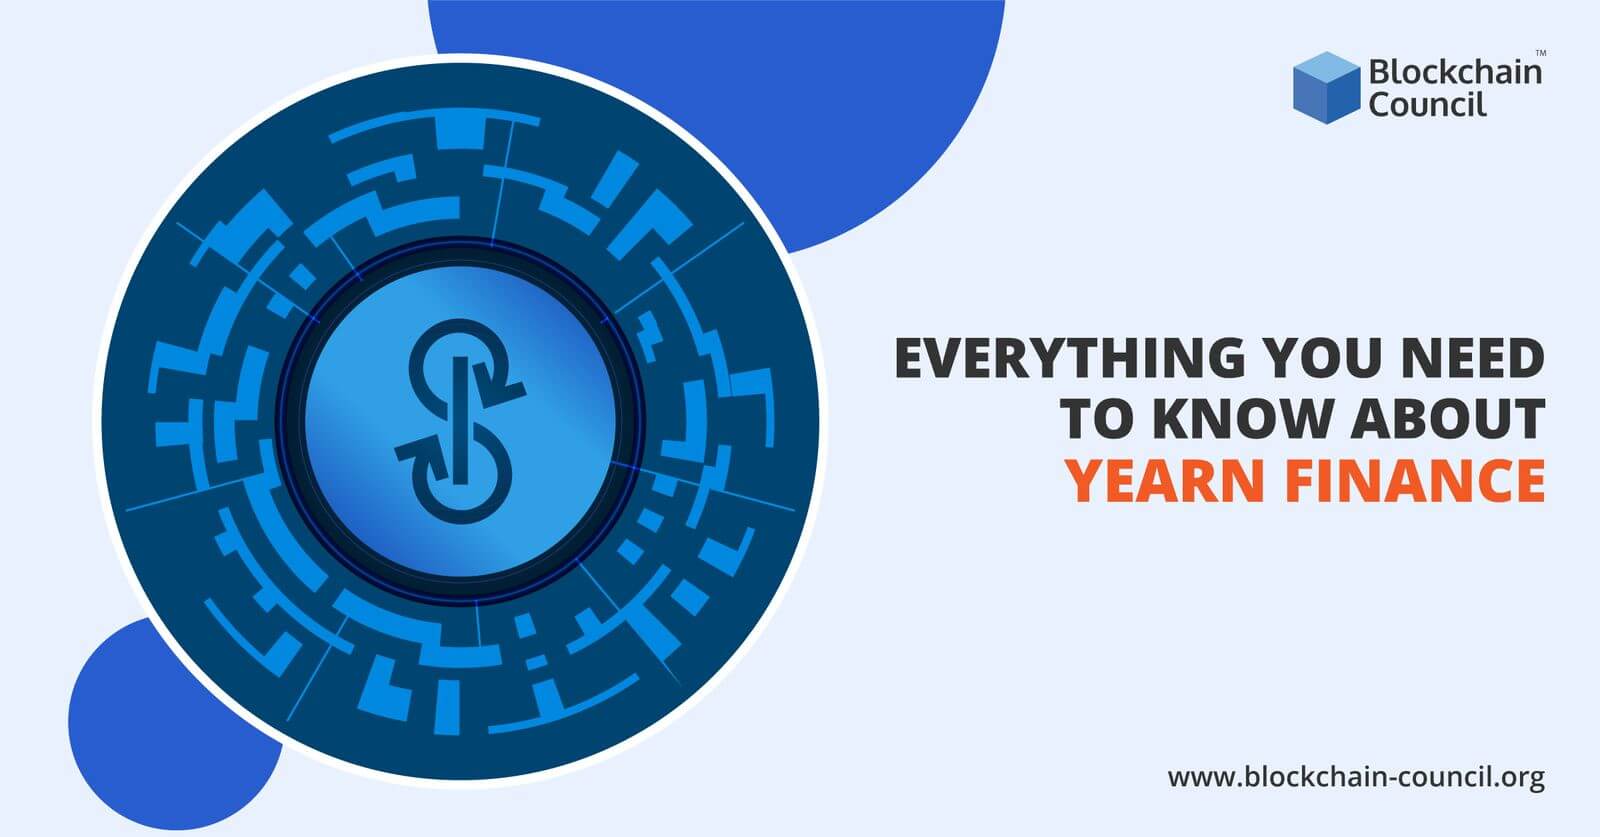 What is cryptocurrency Yearn Finance and how does it work? - 101